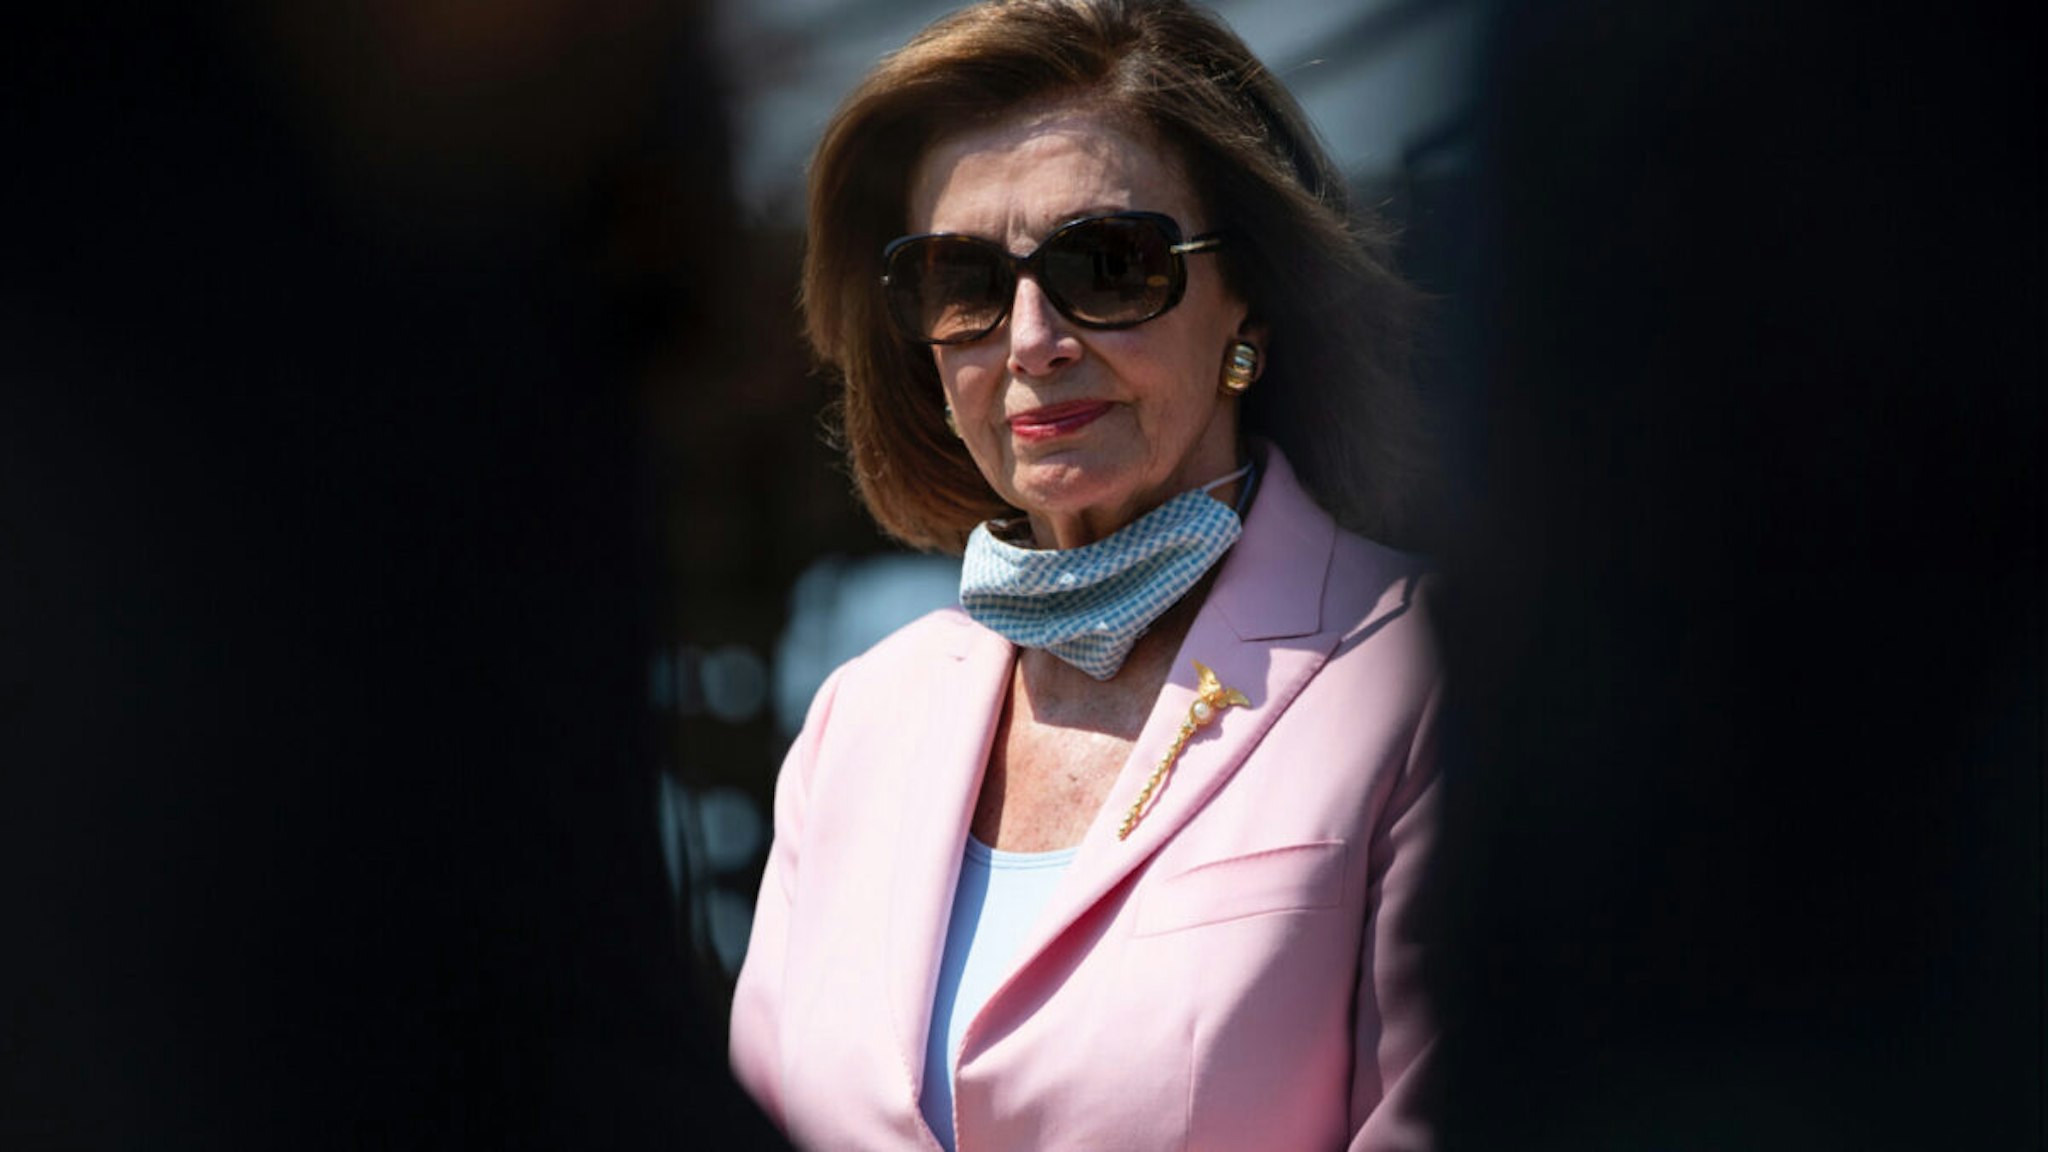 Speaker of the House Nancy Pelosi, D-Calif., is seen during a news conference with Rev. Dr. William Barber and members of the Poor People's Campaign on voting rights and infrastructure, outside the U.S. Capitol on Wednesday, August 25, 2021.